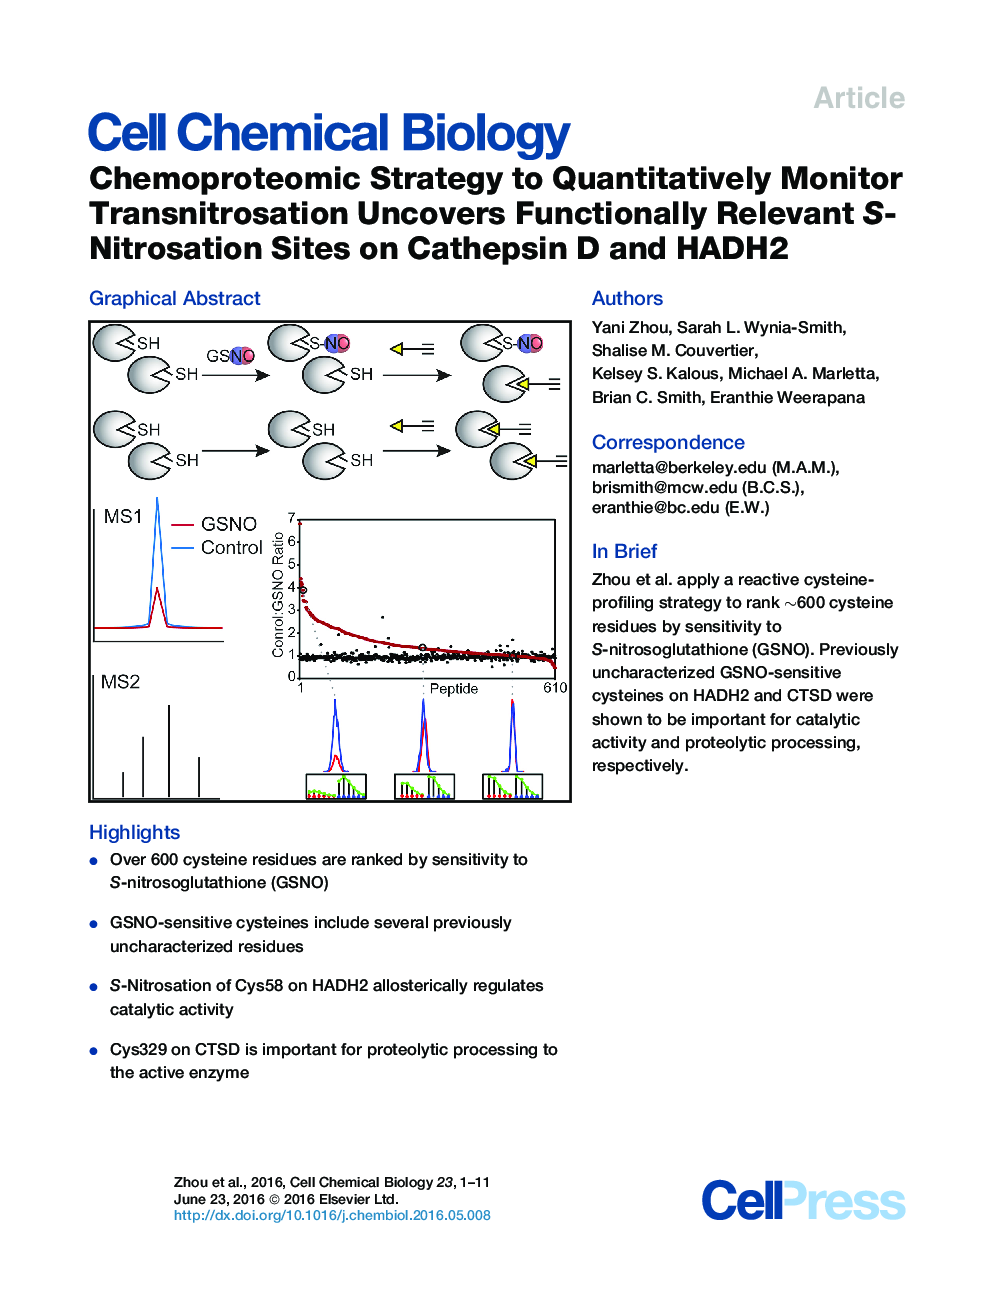 Chemoproteomic Strategy to Quantitatively Monitor Transnitrosation Uncovers Functionally Relevant S-Nitrosation Sites on Cathepsin D and HADH2